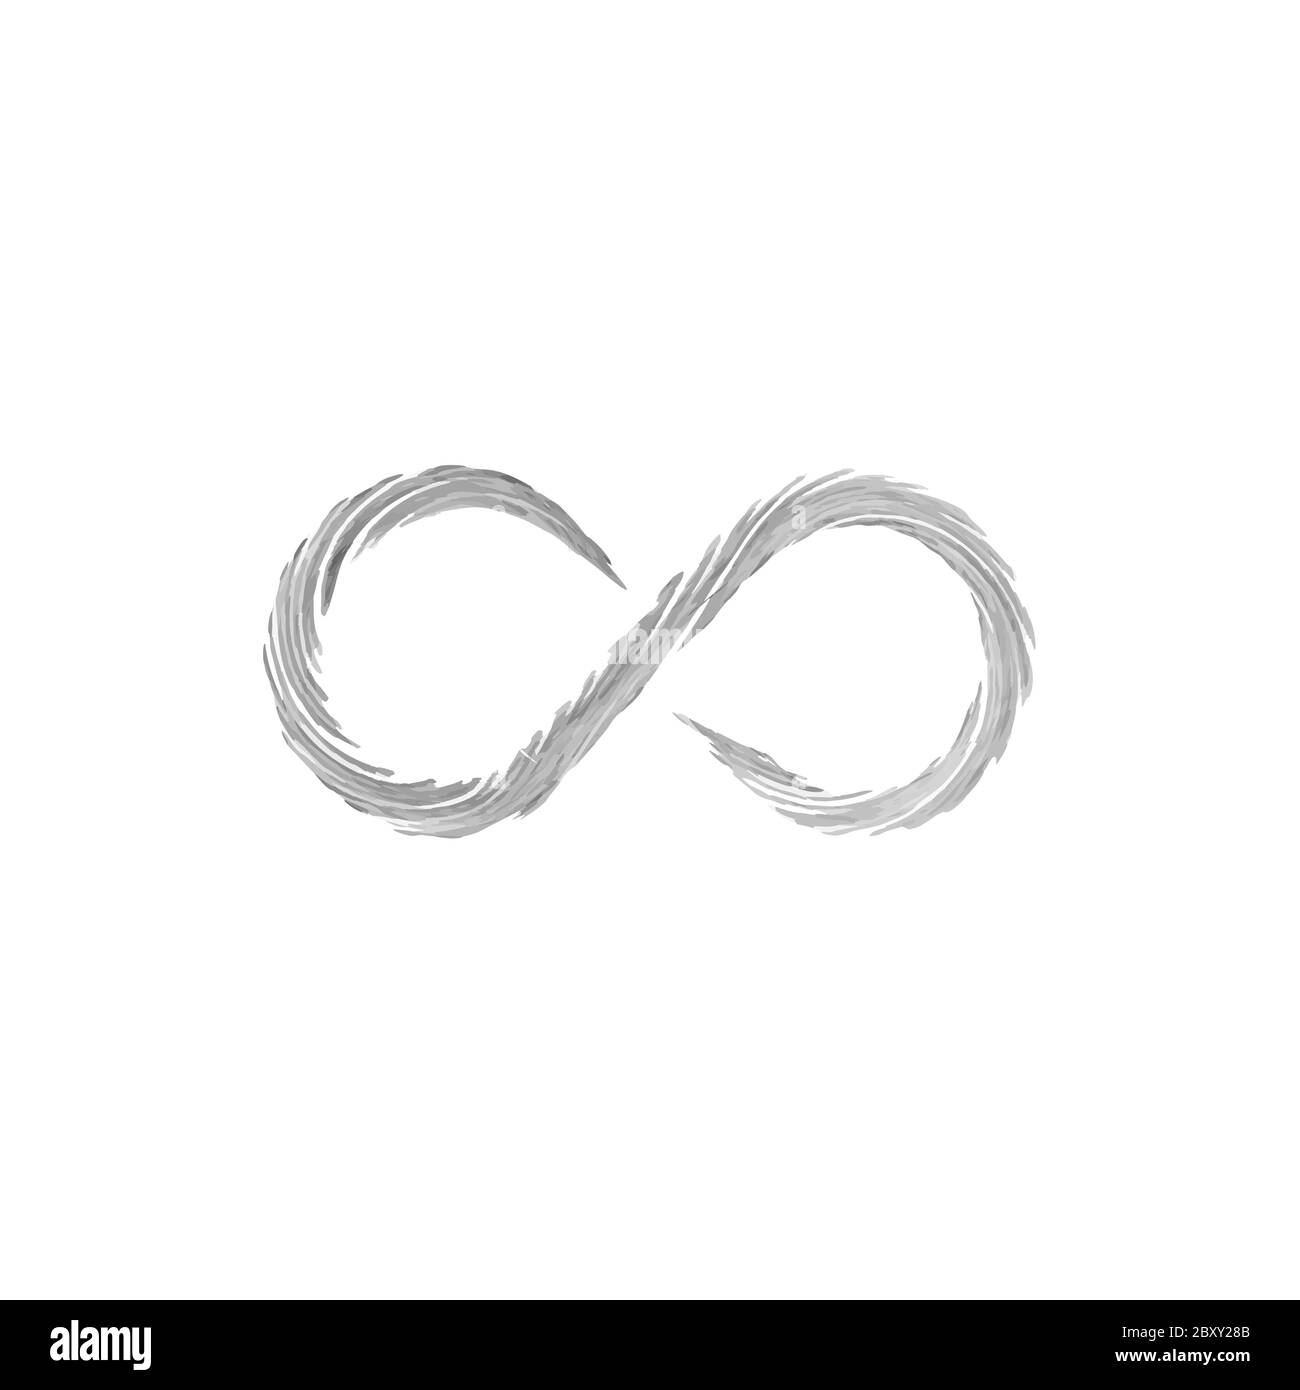 Hand drawn watercolor swirl infinity sign. Stock Vector illustration isolated on white background. Stock Vector